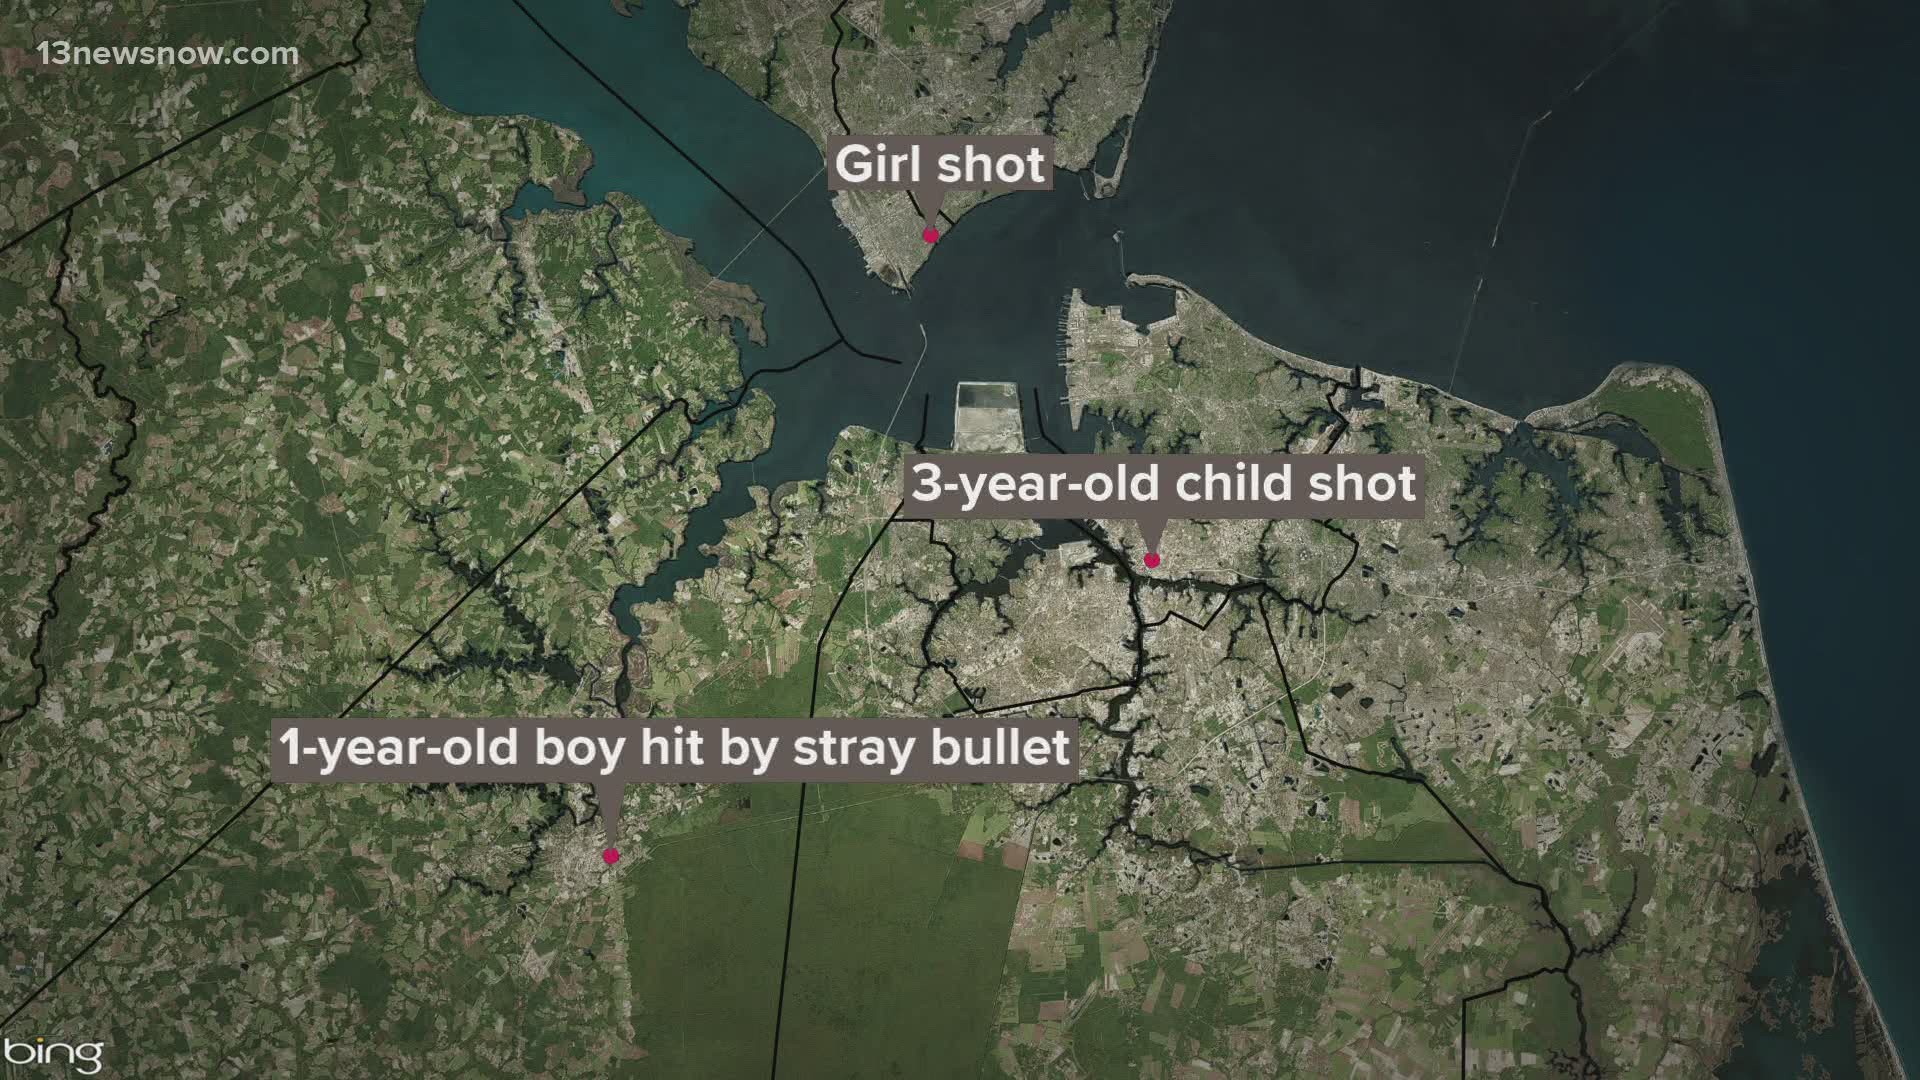 Police said a one-year-old boy was shot by a stray bullet in Suffolk. Another child was shot in Newport News. They both suffered minor injuries.